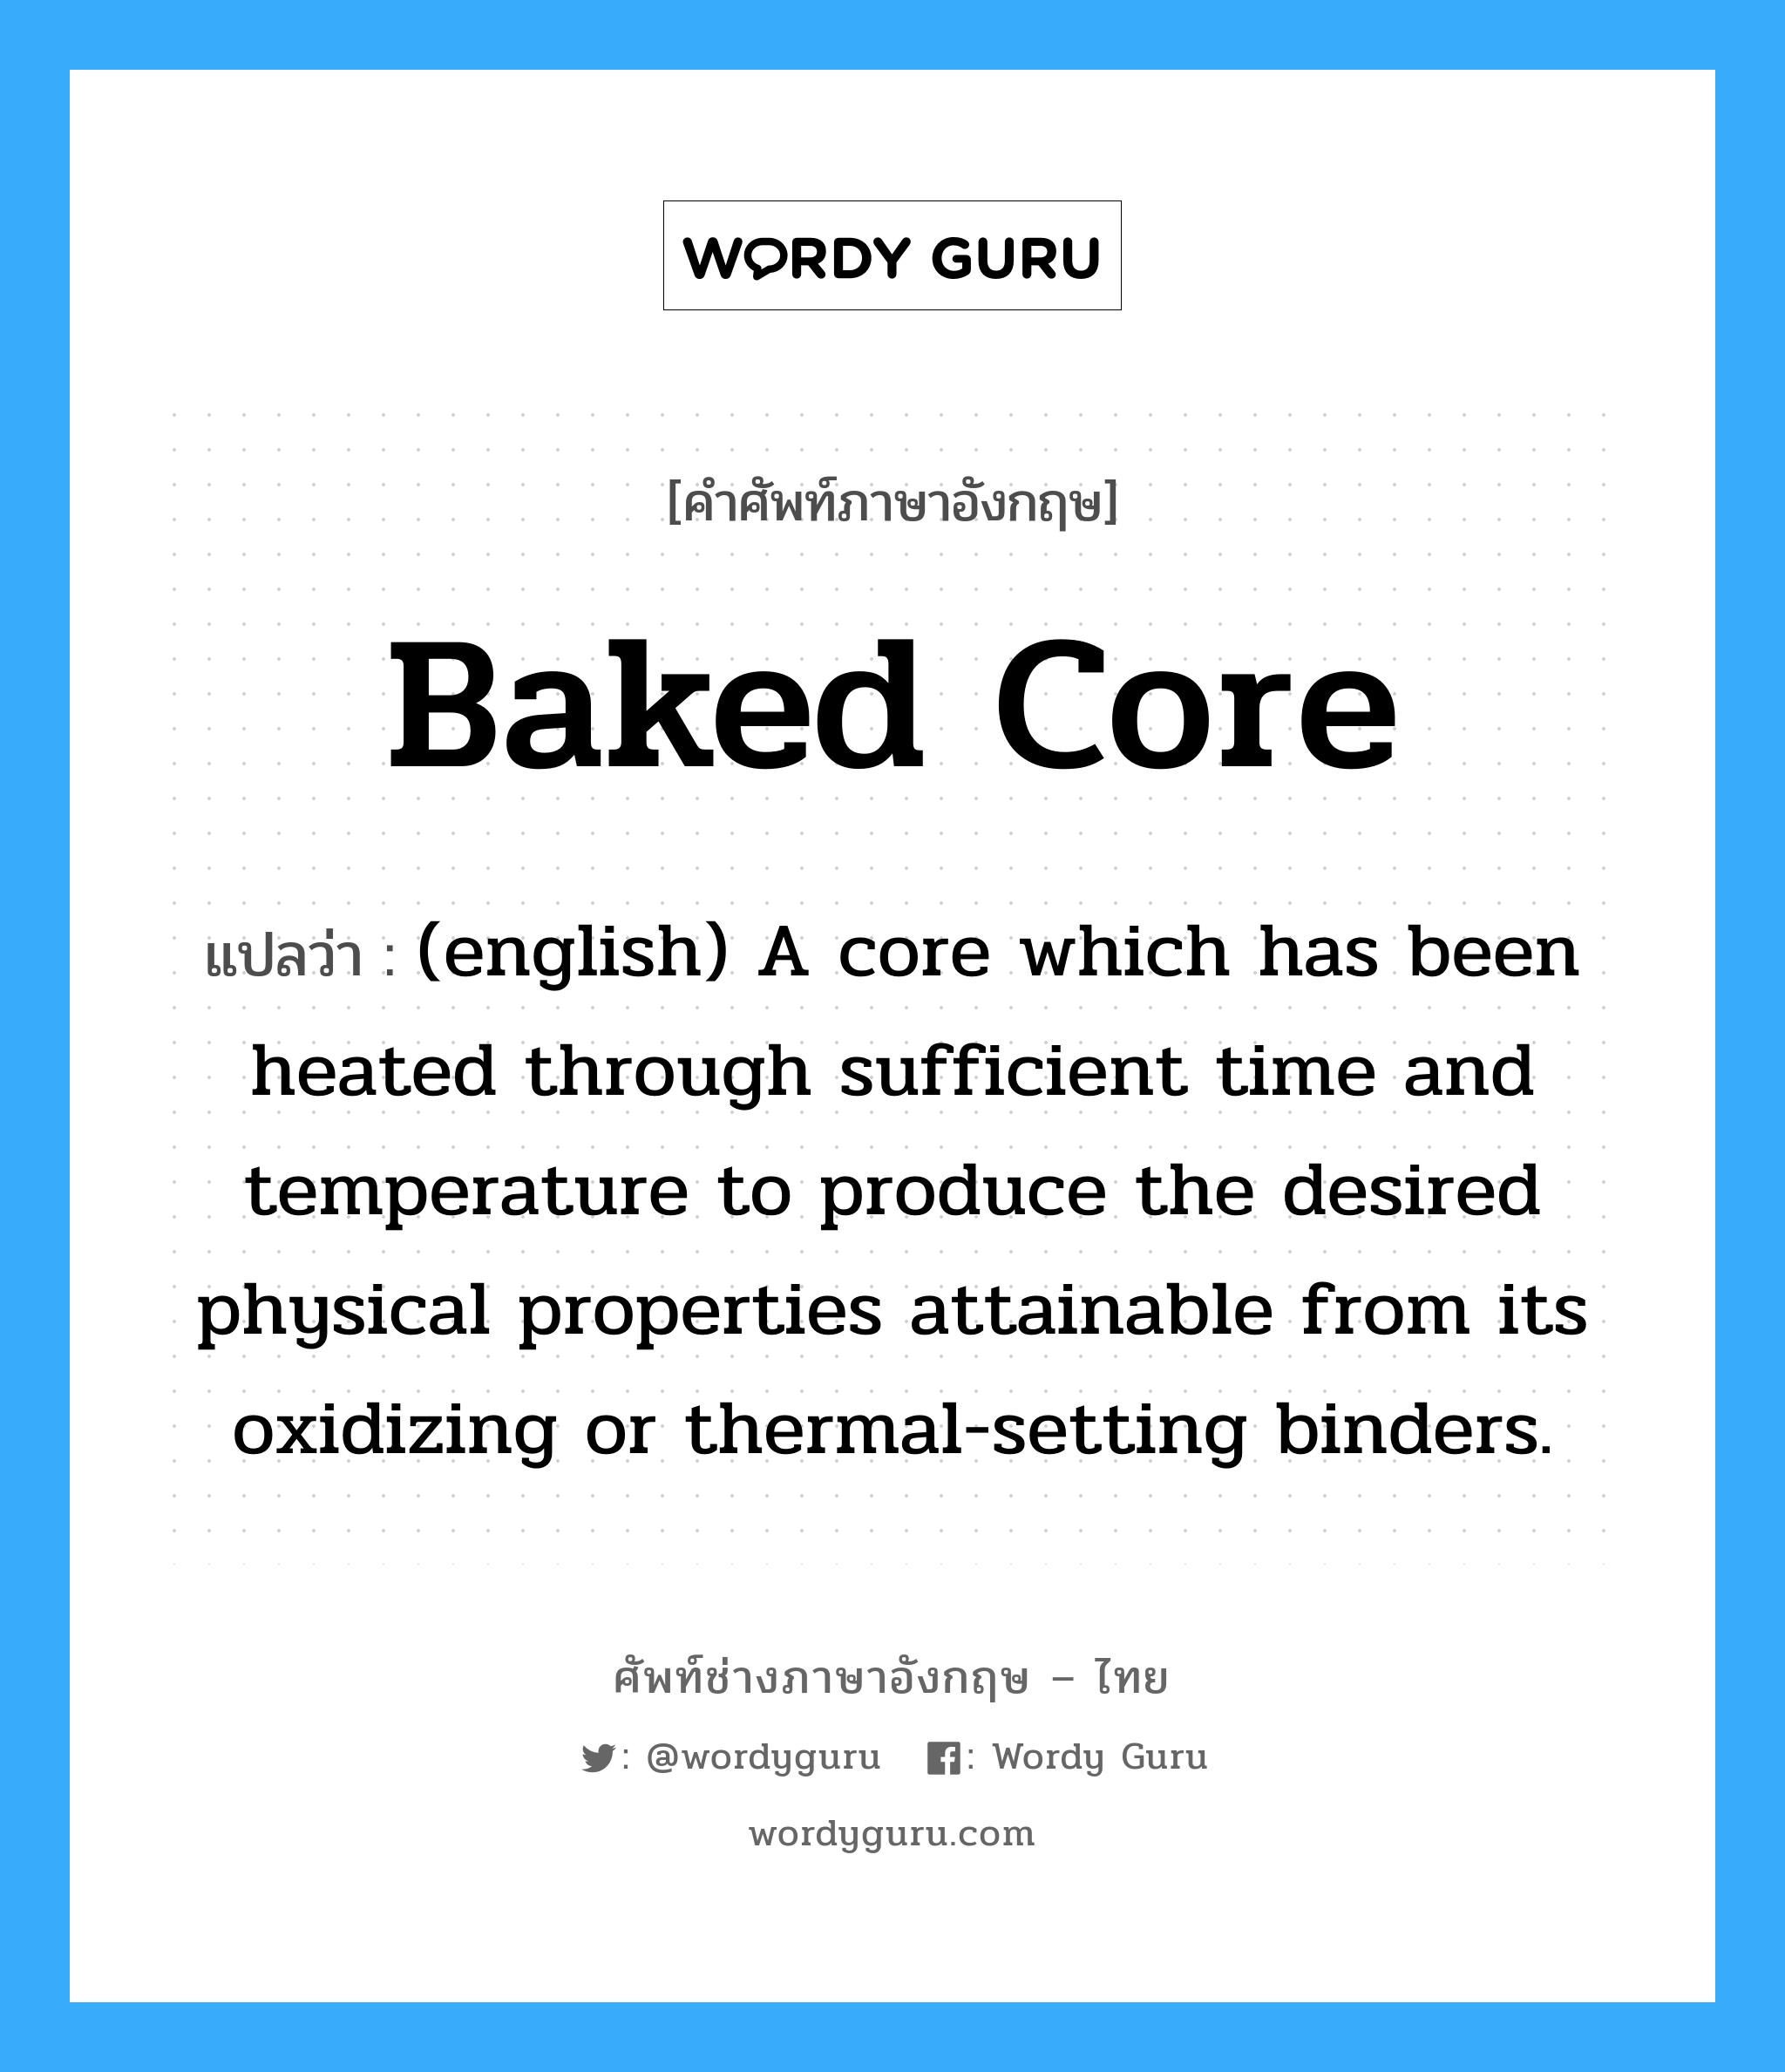 Baked Core แปลว่า?, คำศัพท์ช่างภาษาอังกฤษ - ไทย Baked Core คำศัพท์ภาษาอังกฤษ Baked Core แปลว่า (english) A core which has been heated through sufficient time and temperature to produce the desired physical properties attainable from its oxidizing or thermal-setting binders.